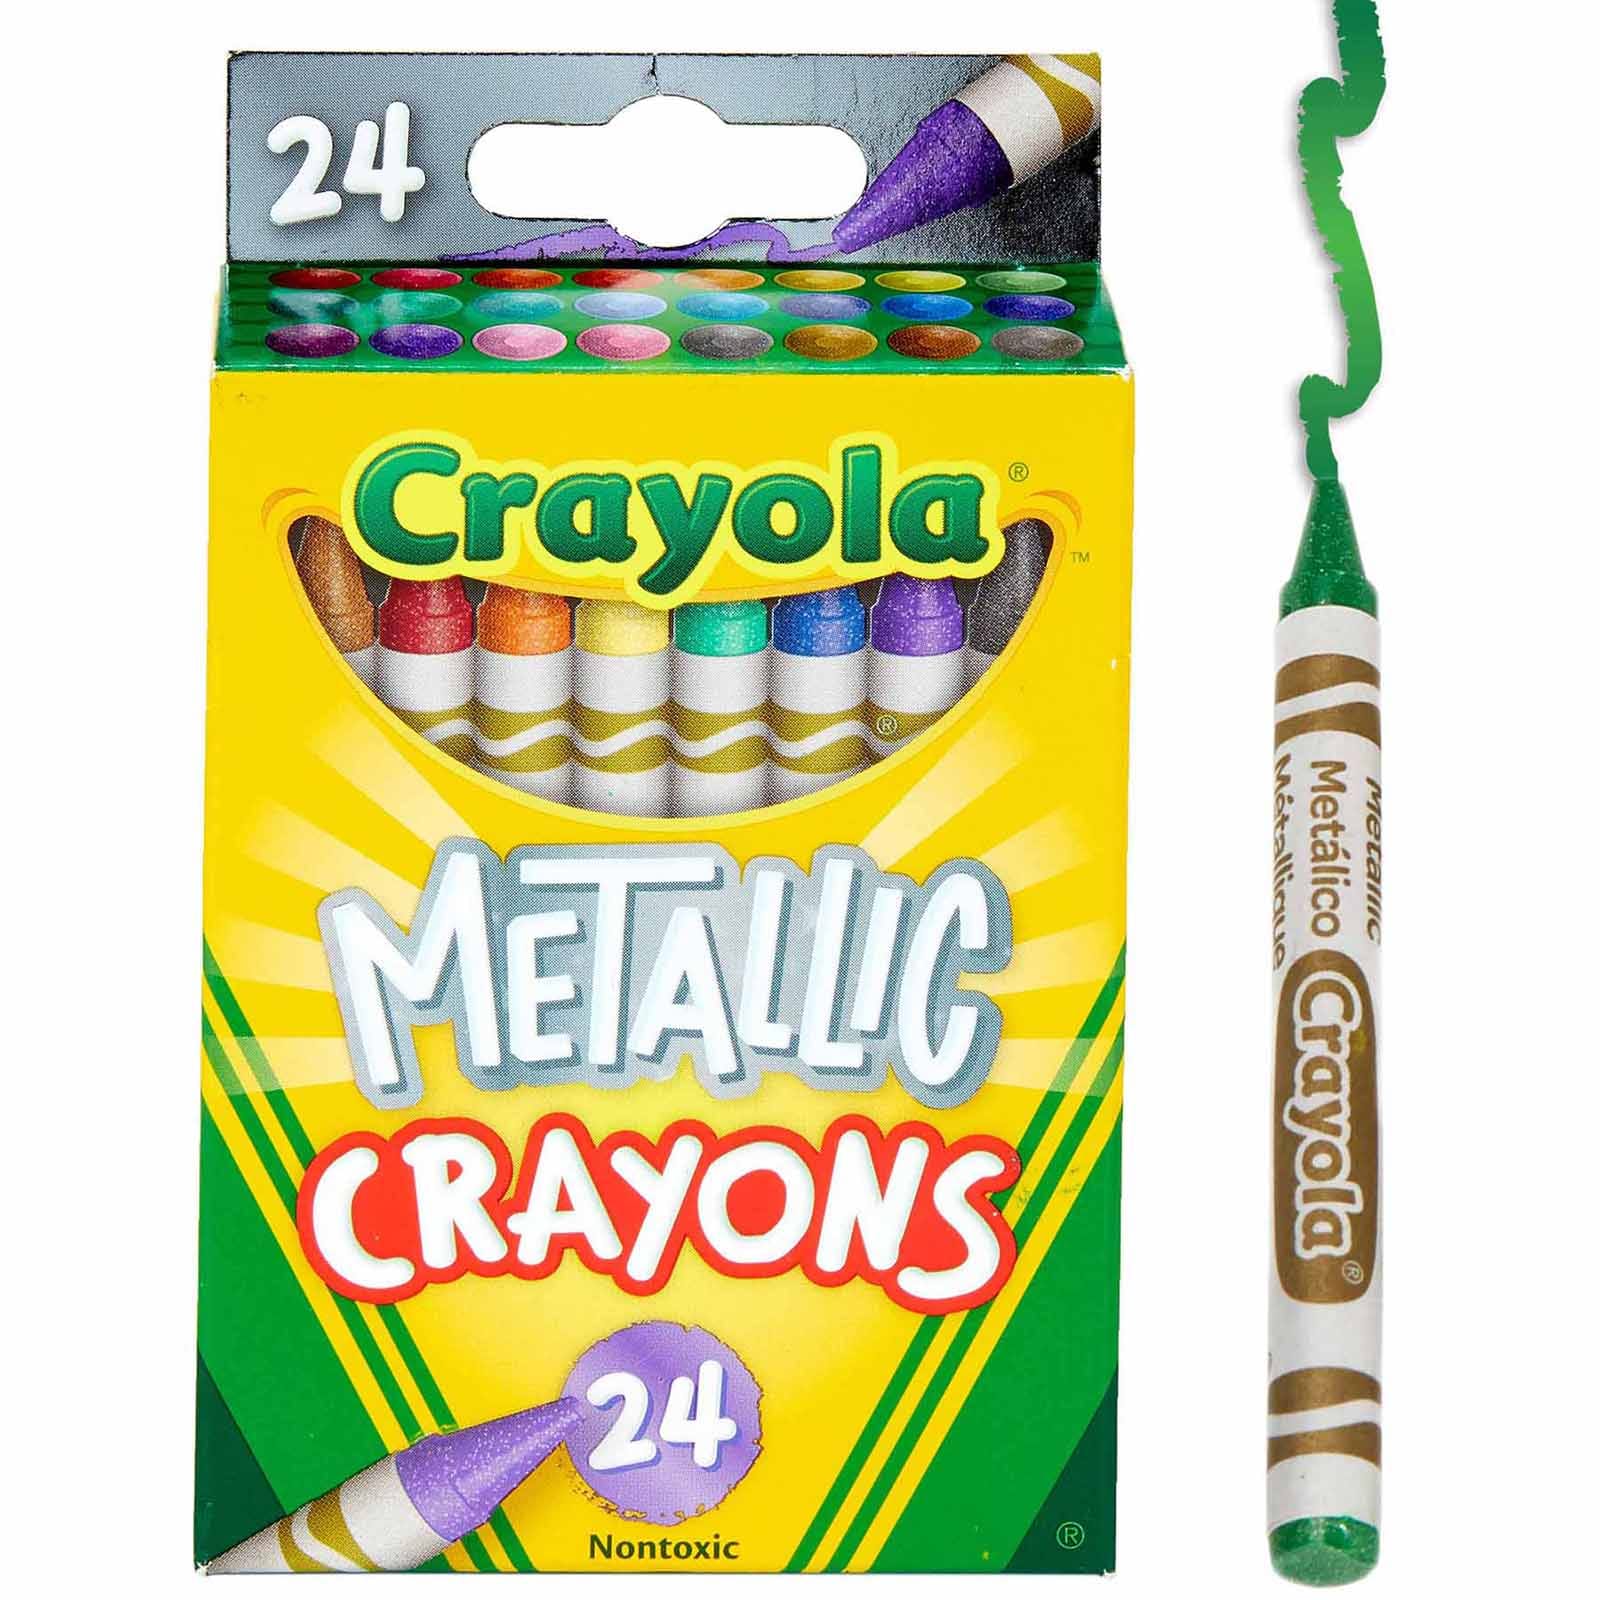 144 Crayons in Total Pack of 6 Crayola Crayons 24 in a Box 